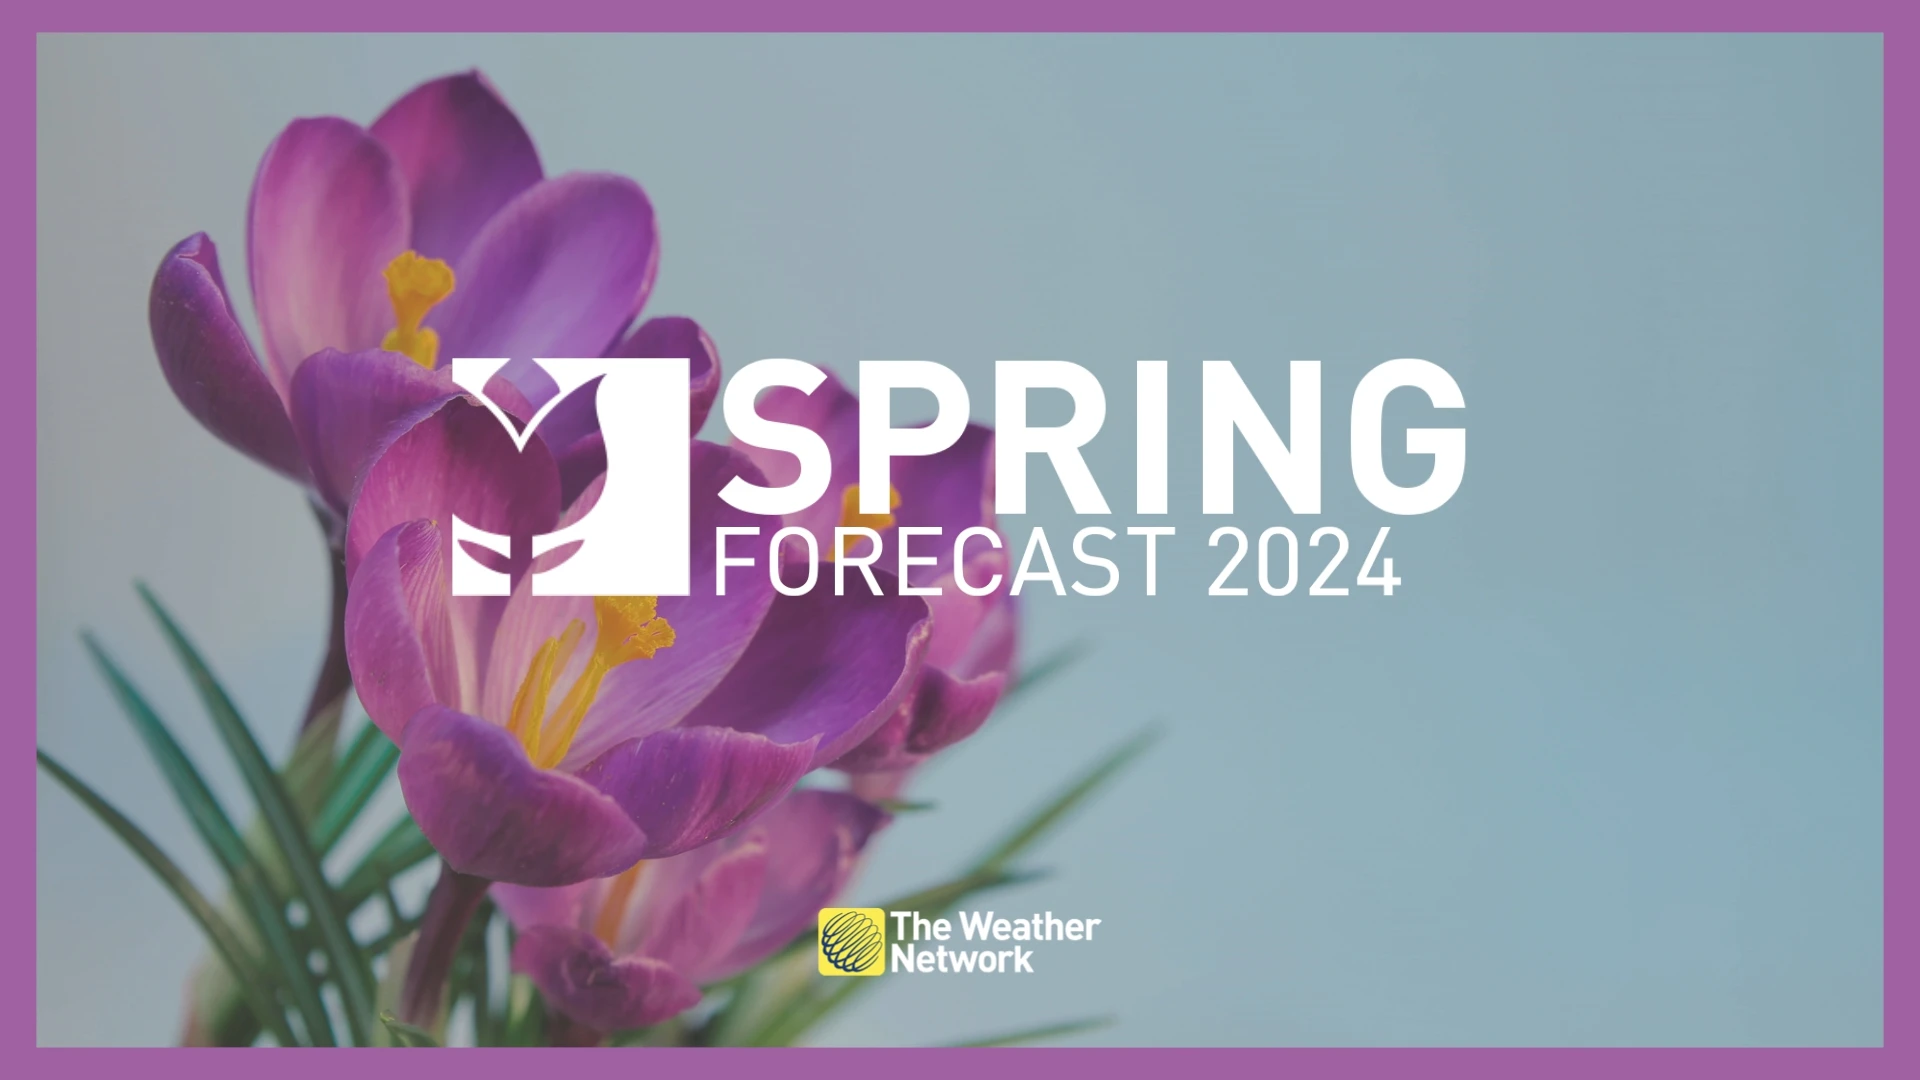 When is Spring 2024?